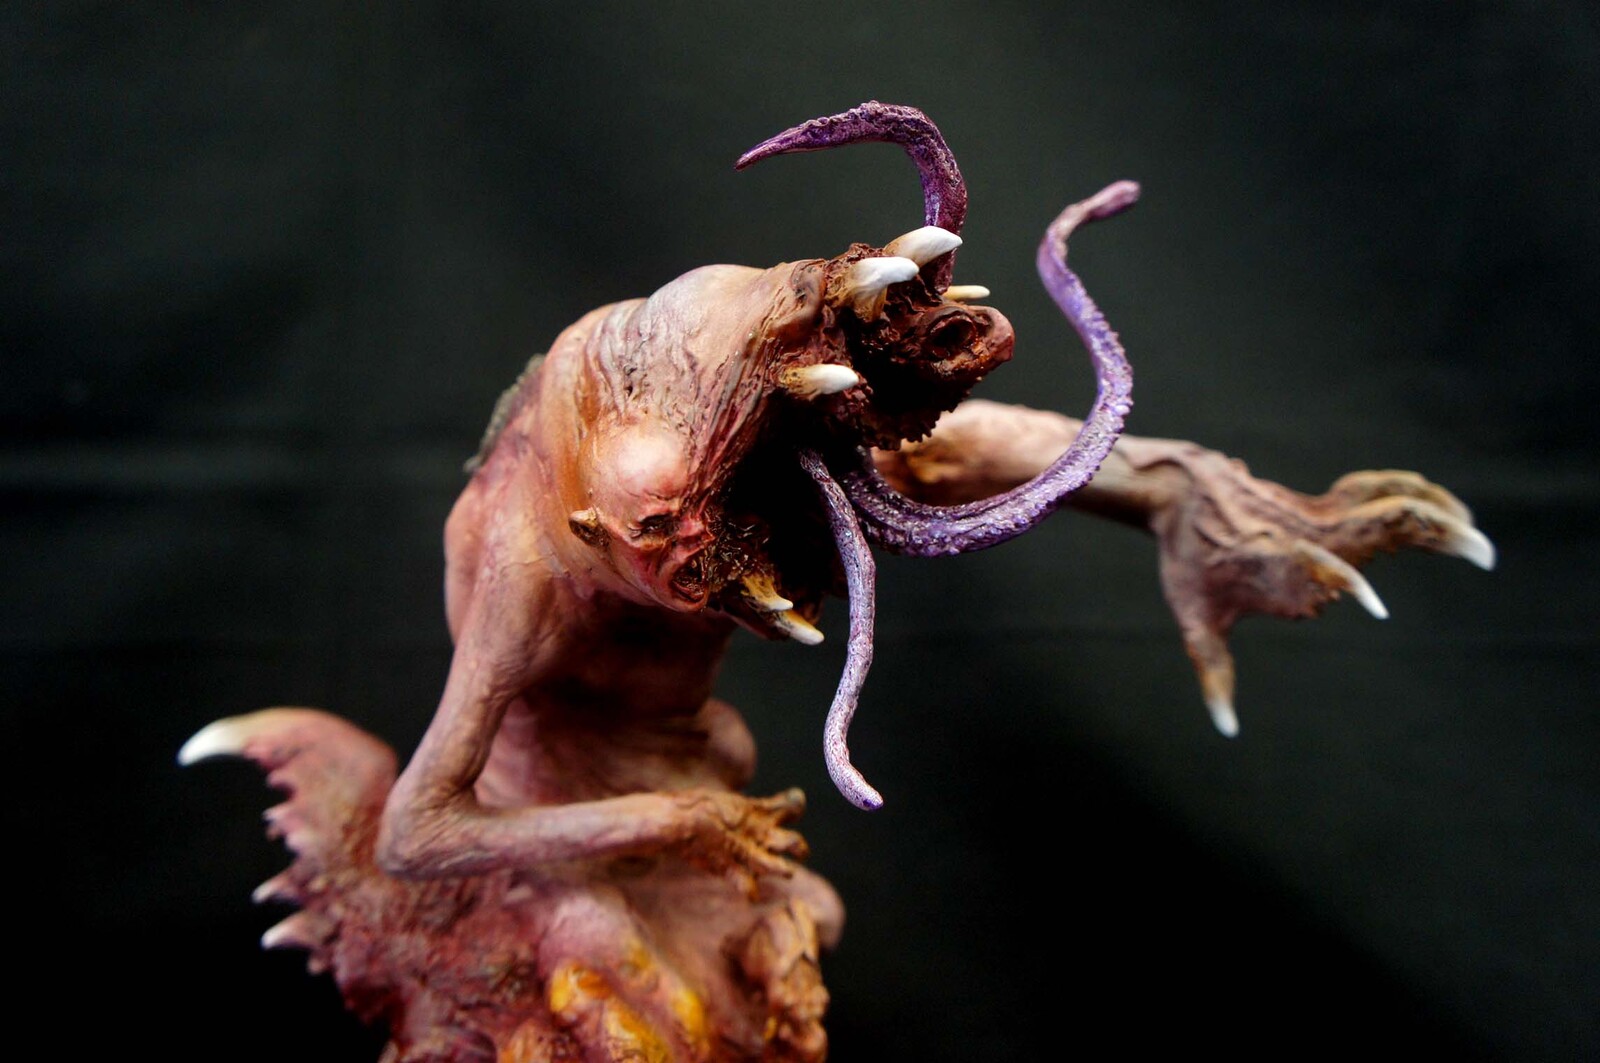 John Carpenter "The Thing"  Blair Who Goes There Monster Art Statue 
https://www.solidart.club